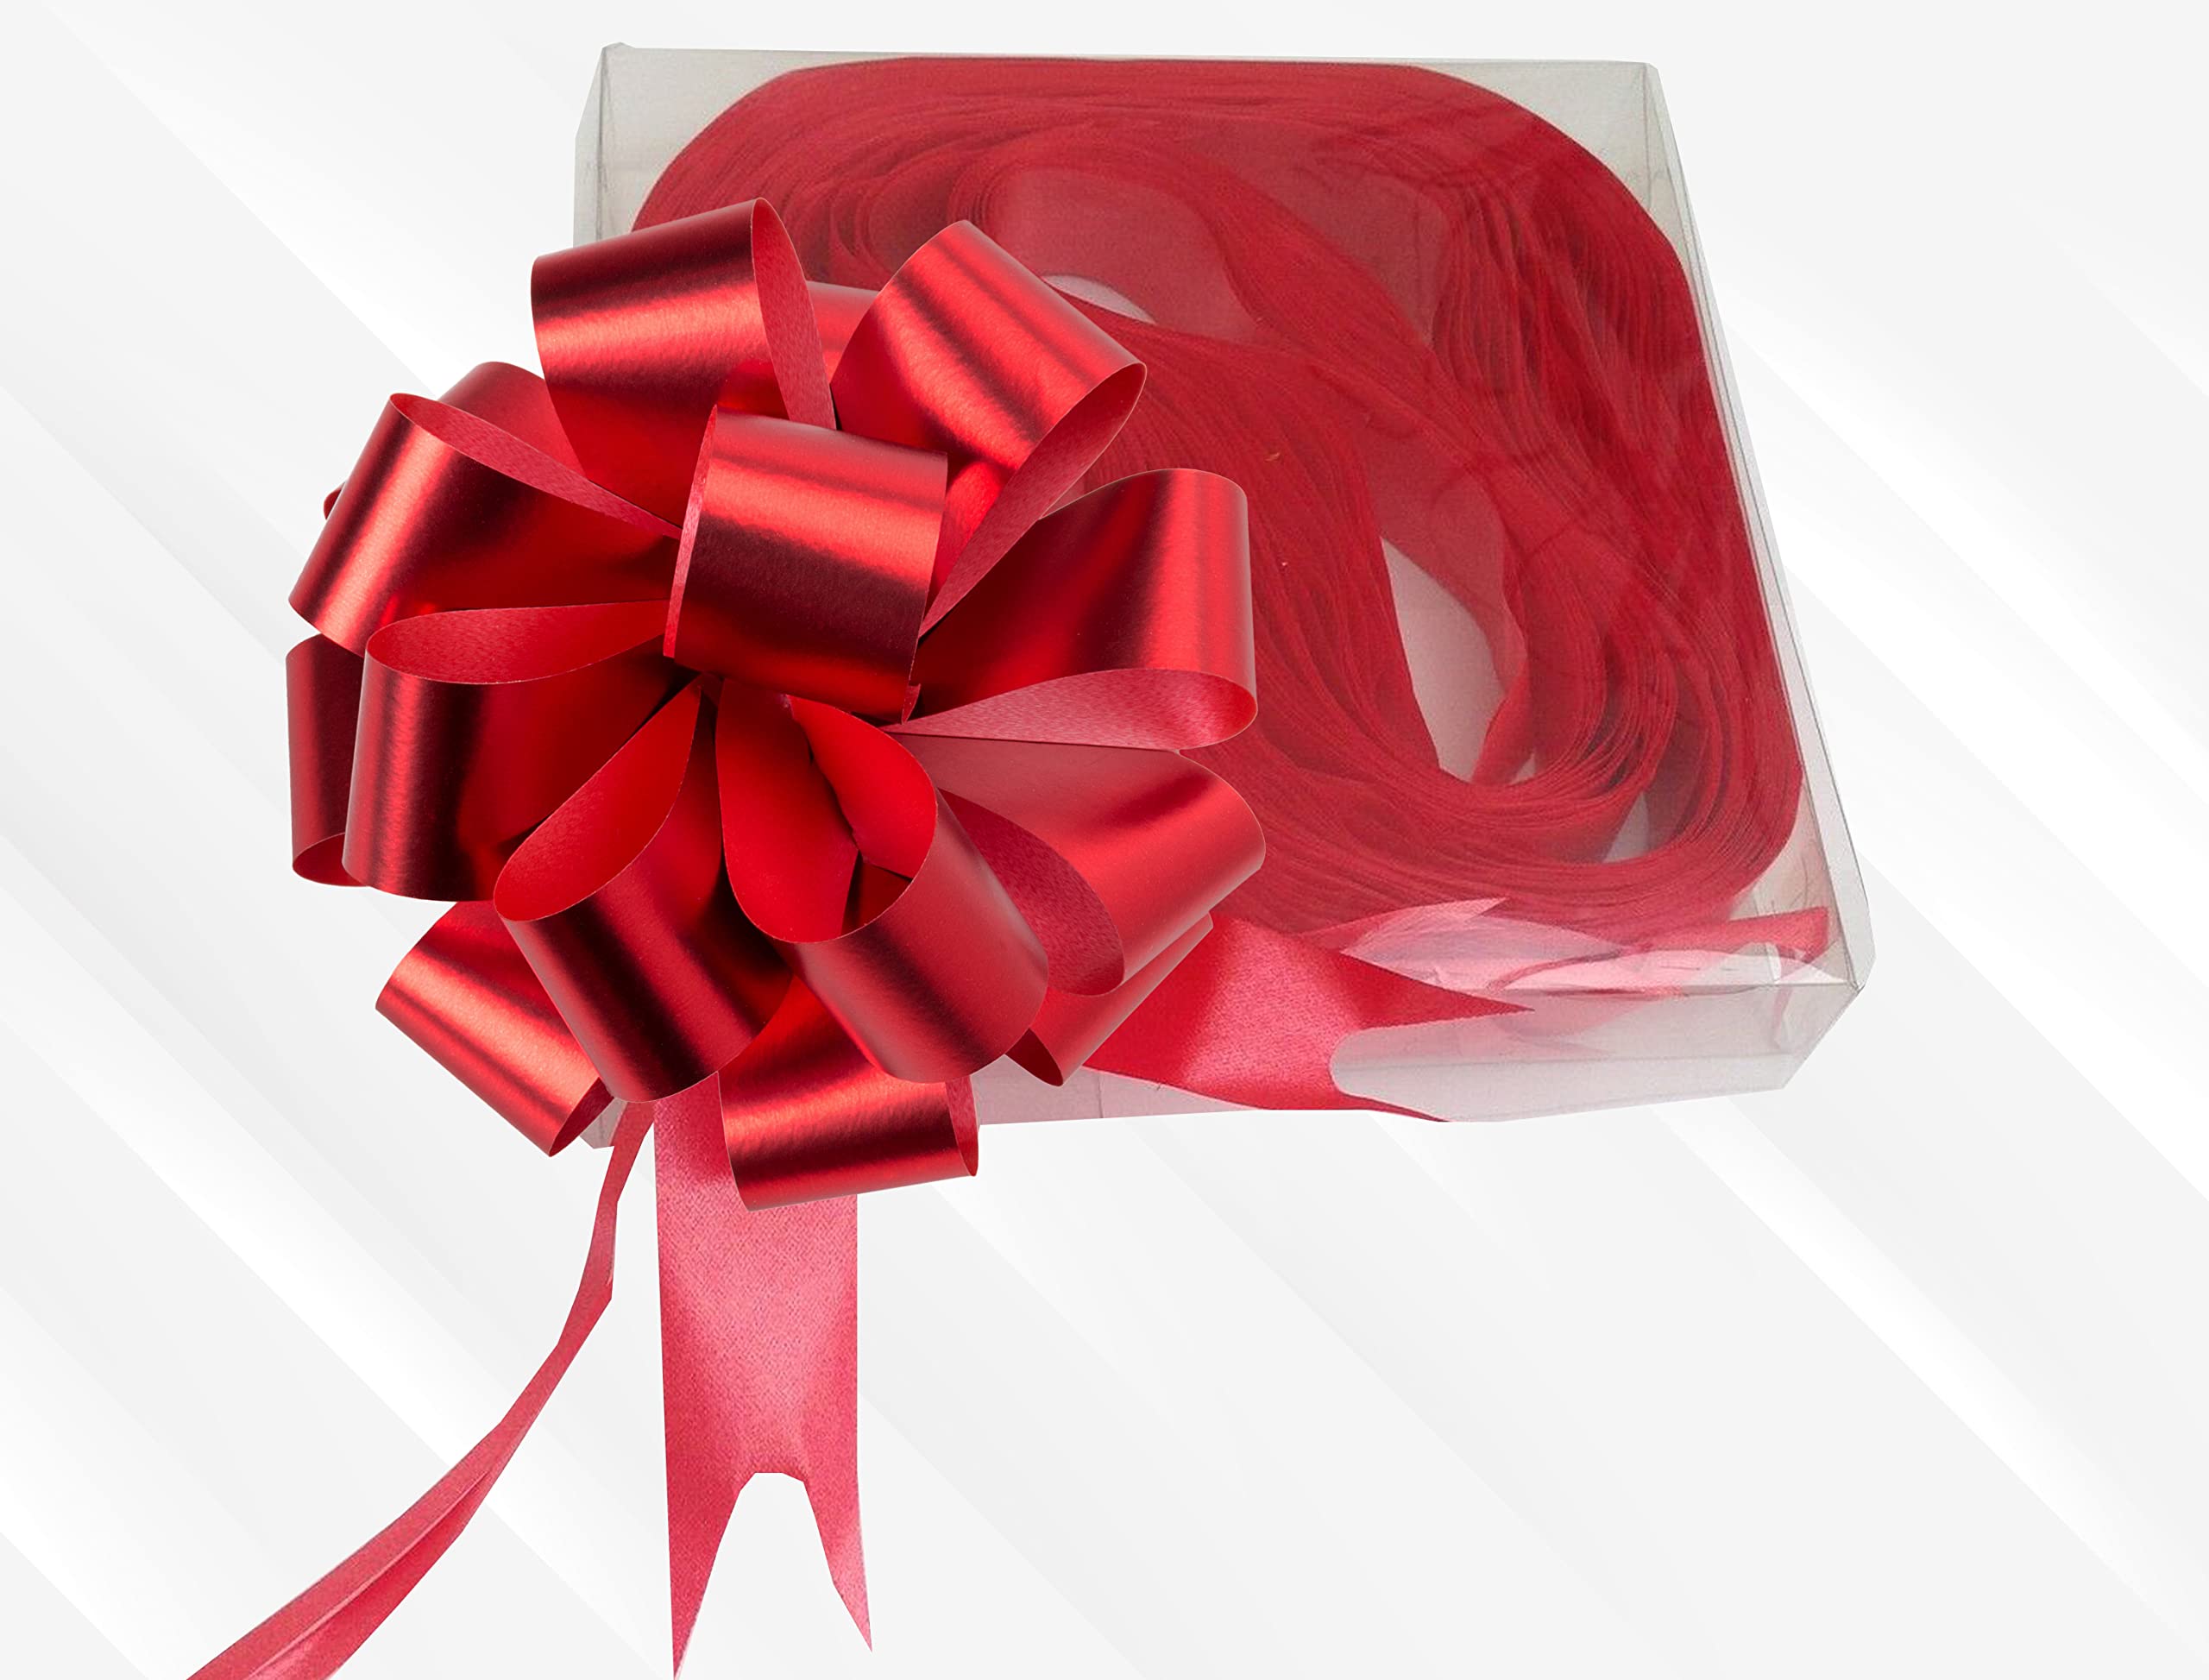 A wrapped gift with a bow.